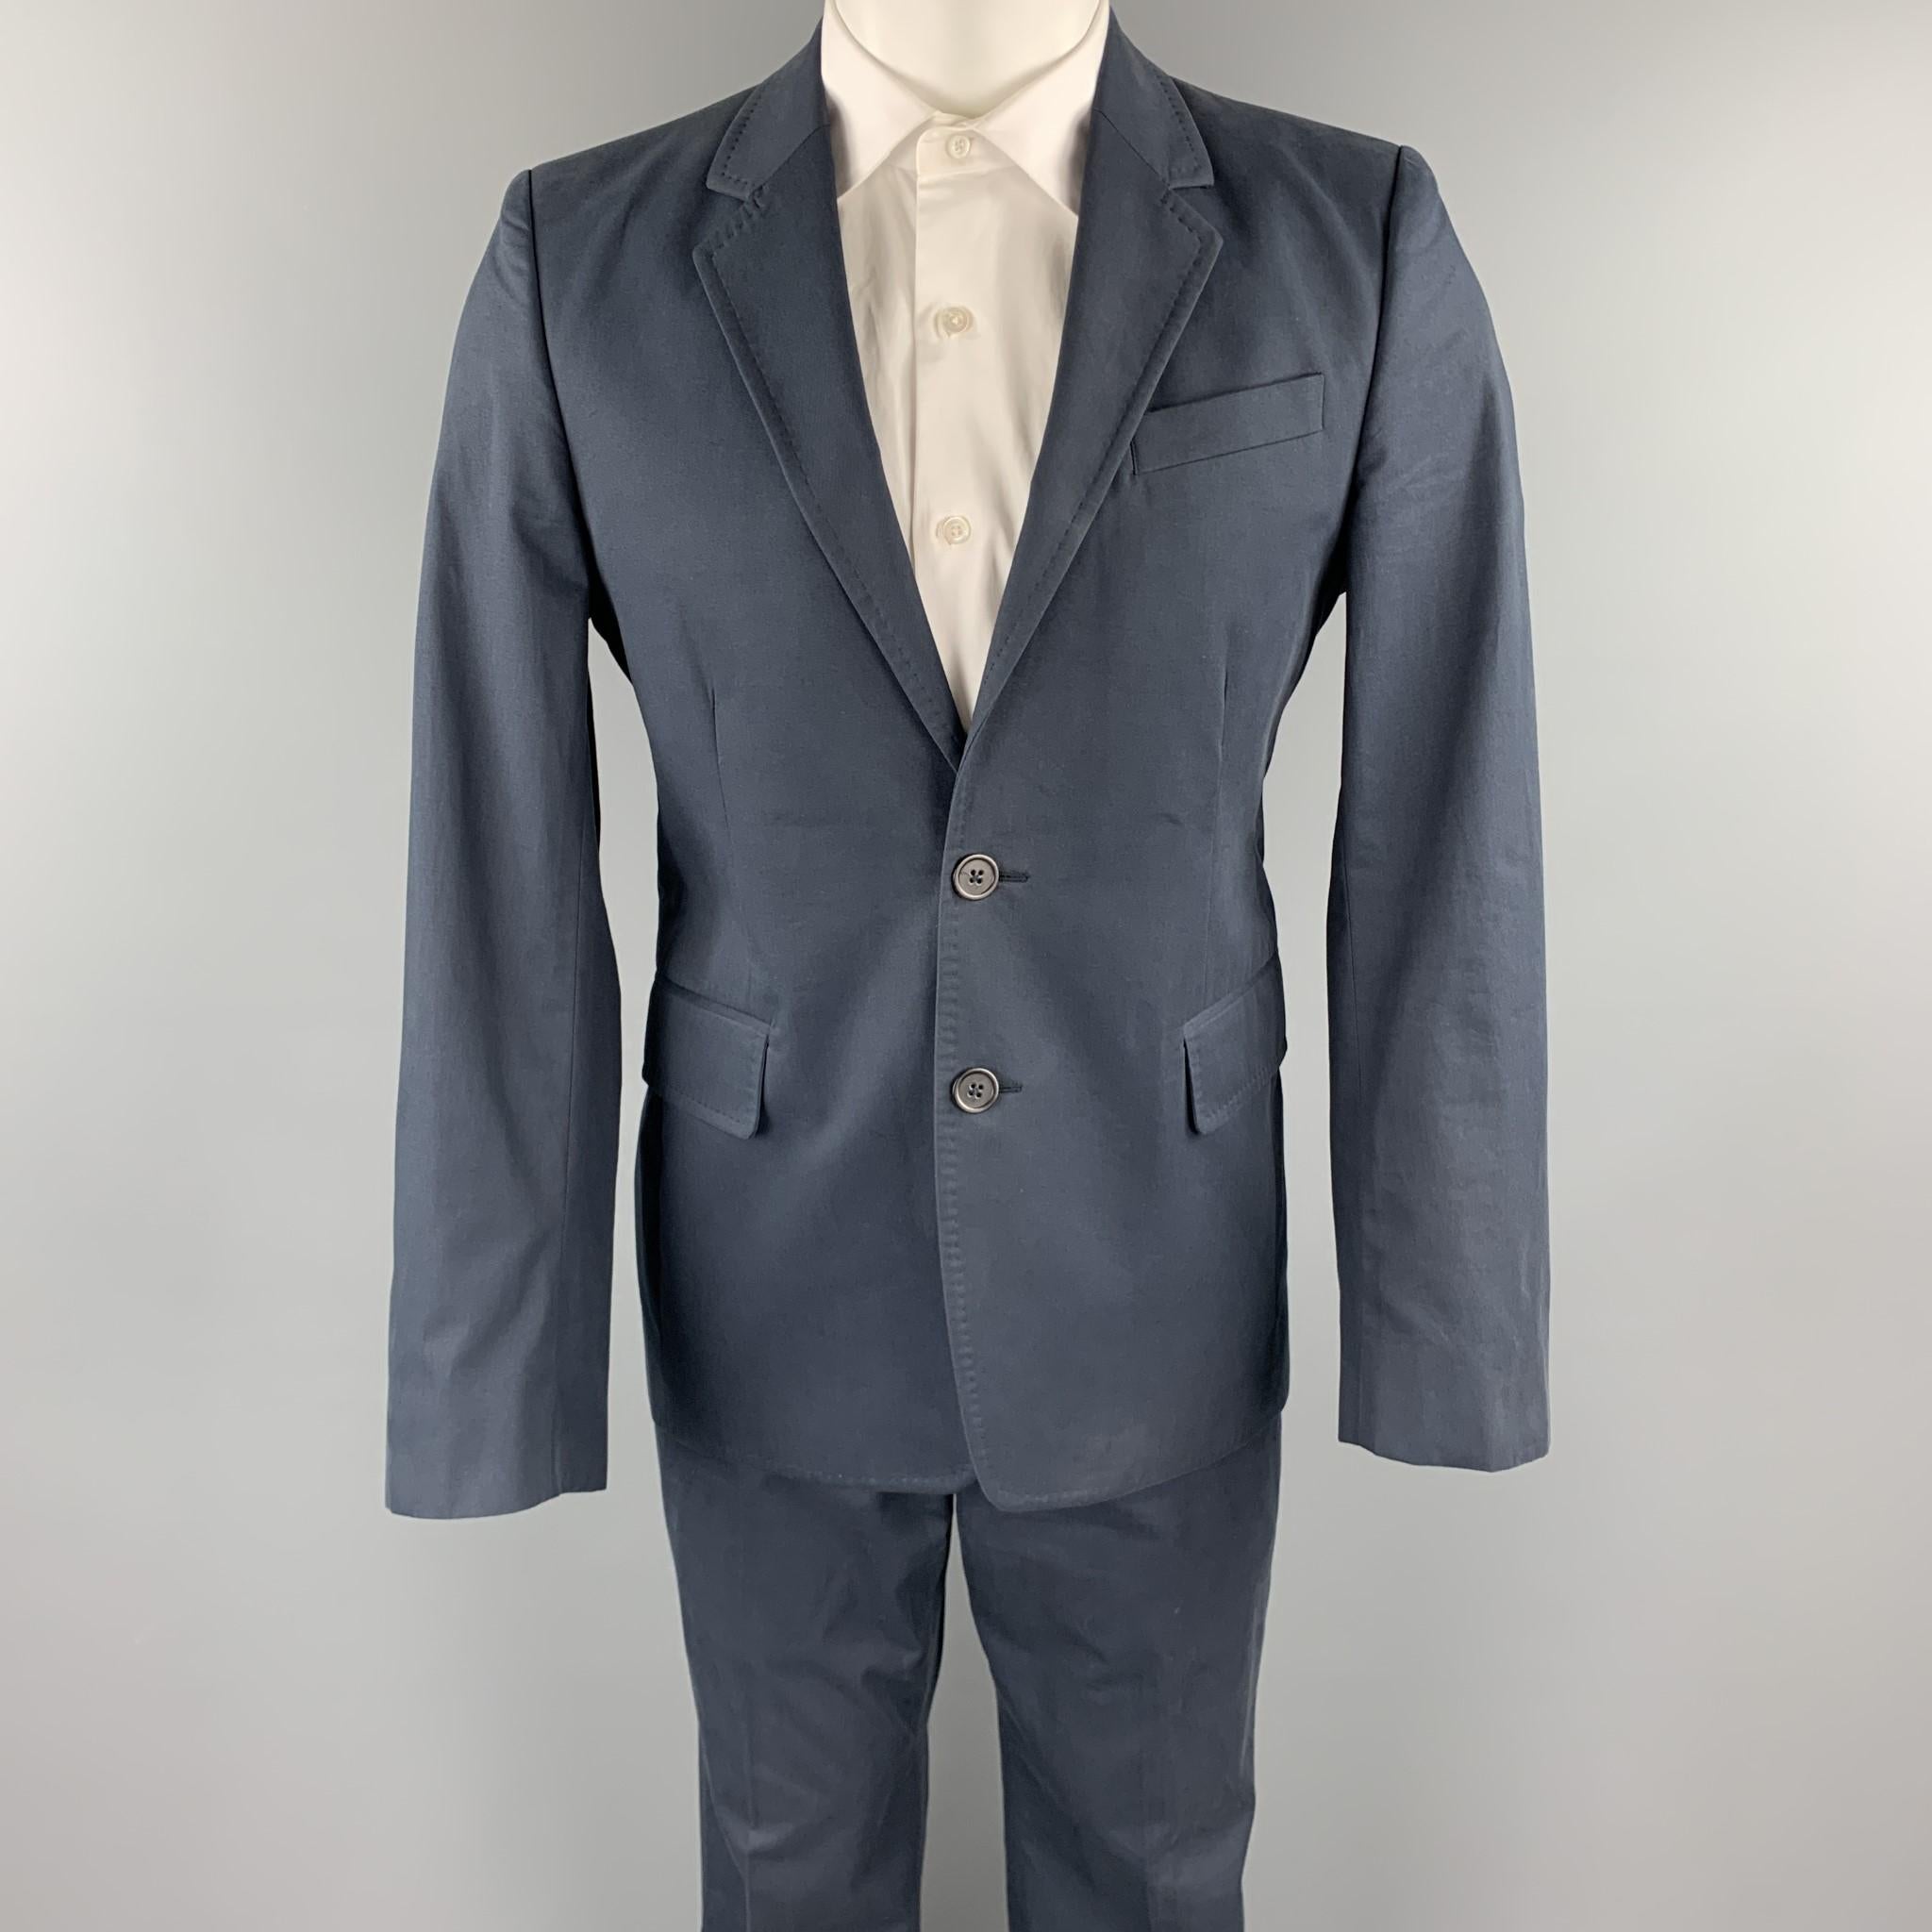 ANN DEMEULEMEESTER suit comes in a navy cotton and includes a single breasted, two button sport coat with a notch lapel and matching flat front trousers. Comes with tags. Made in Portugal.

Very Good Pre-Owned Condition.
Marked: